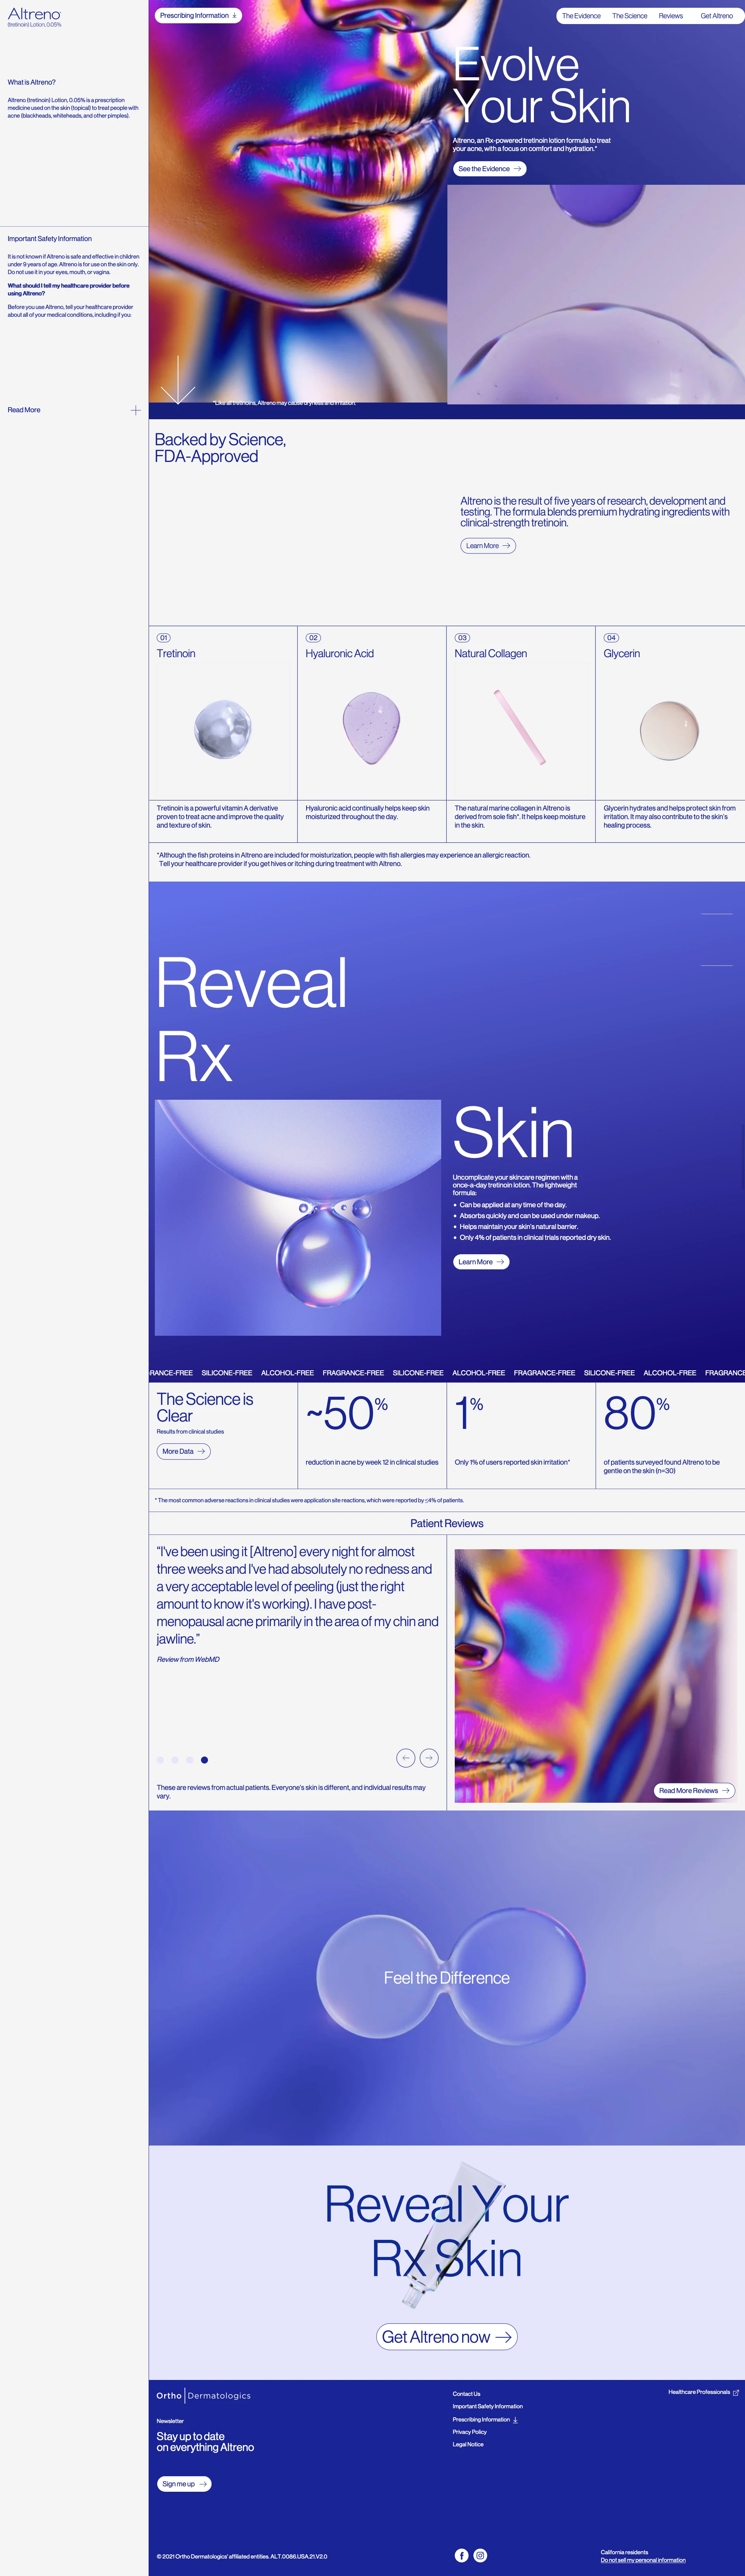 Altreno Landing Page Example: Reveal your Rx Skin. Learn more about Altreno, the only tretinoin in a hydrating lotion formulation.